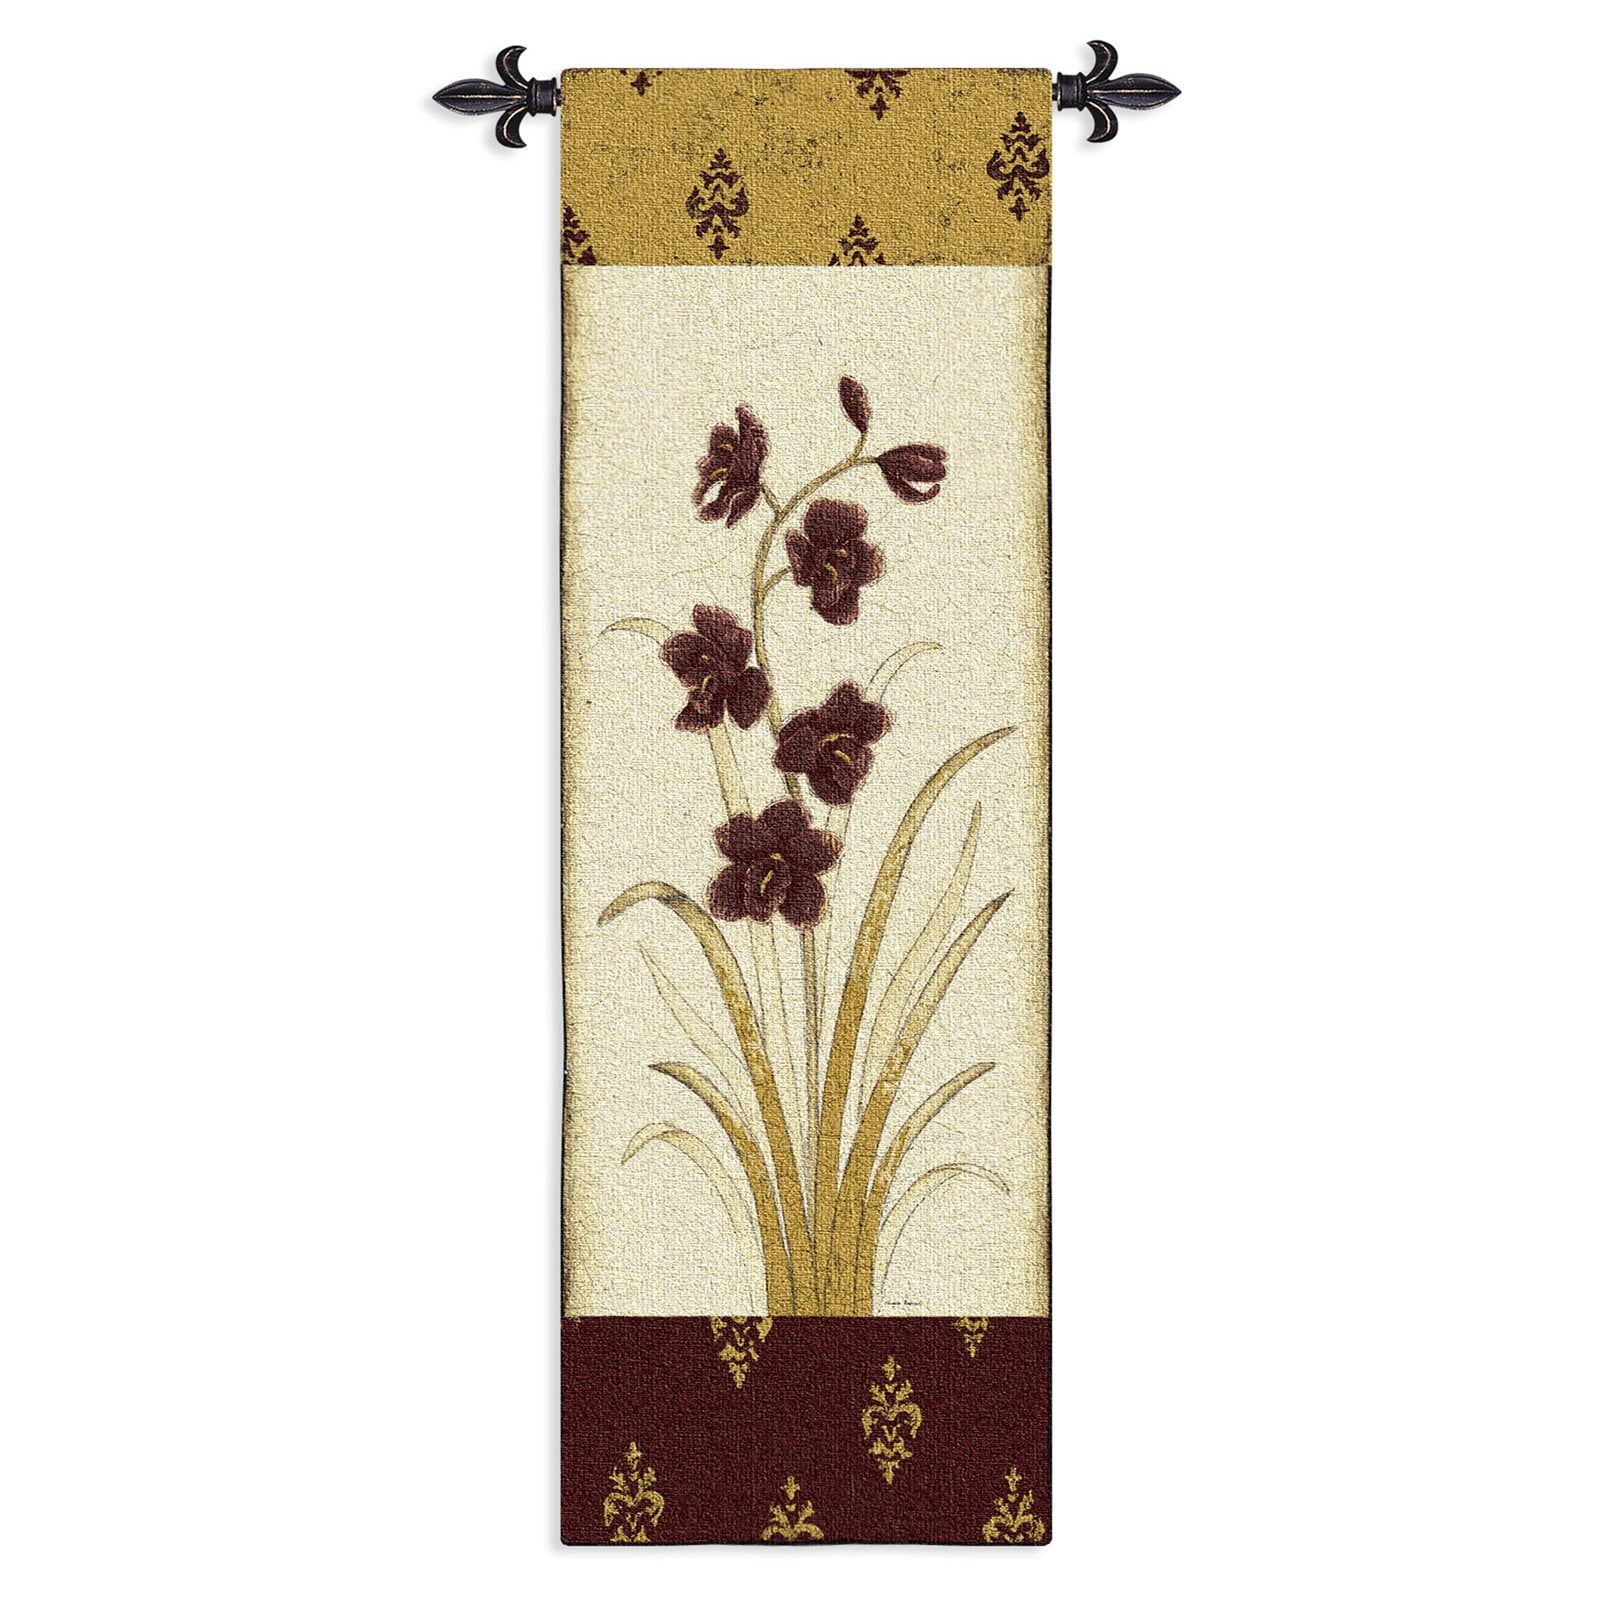 Elegant orchid Modern Jacquard Woven Fine Art Tapestry Wall Hanging 